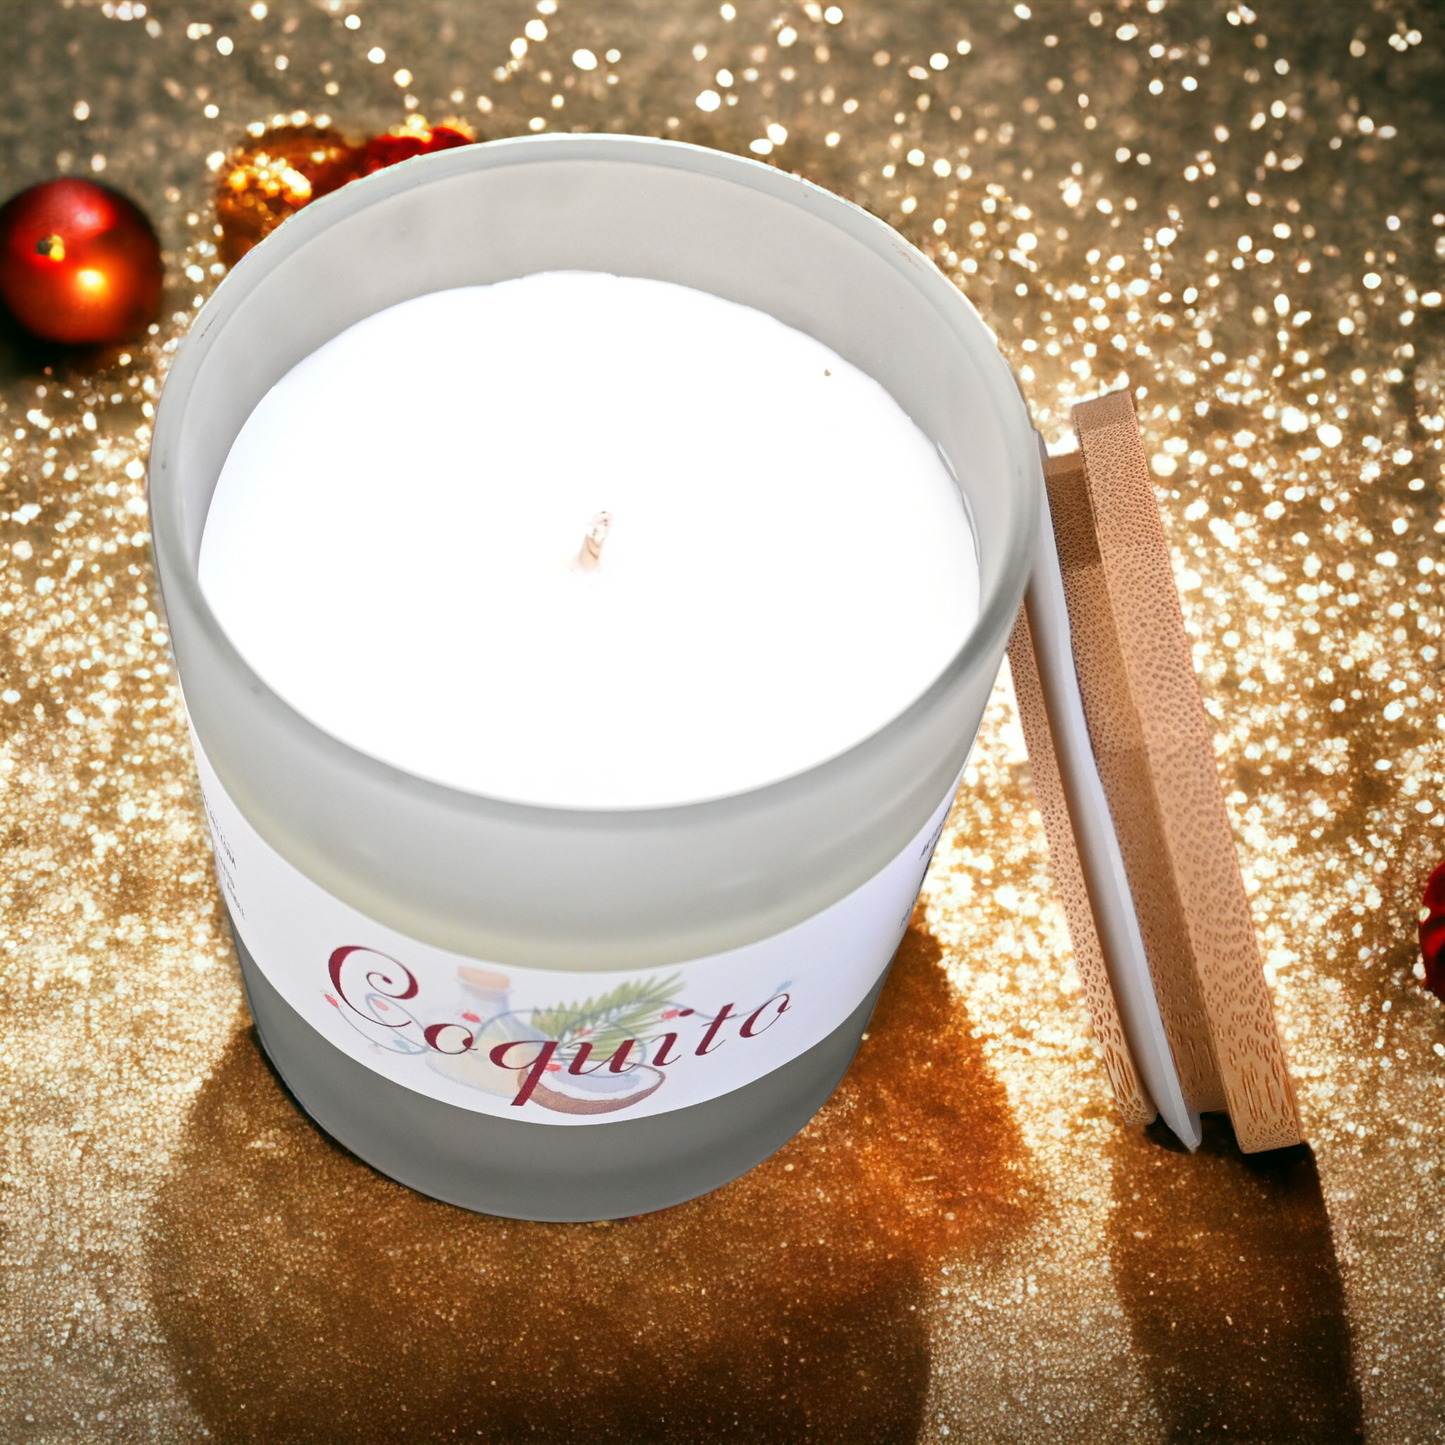 Coquito Candle - Coquito Scented Candle